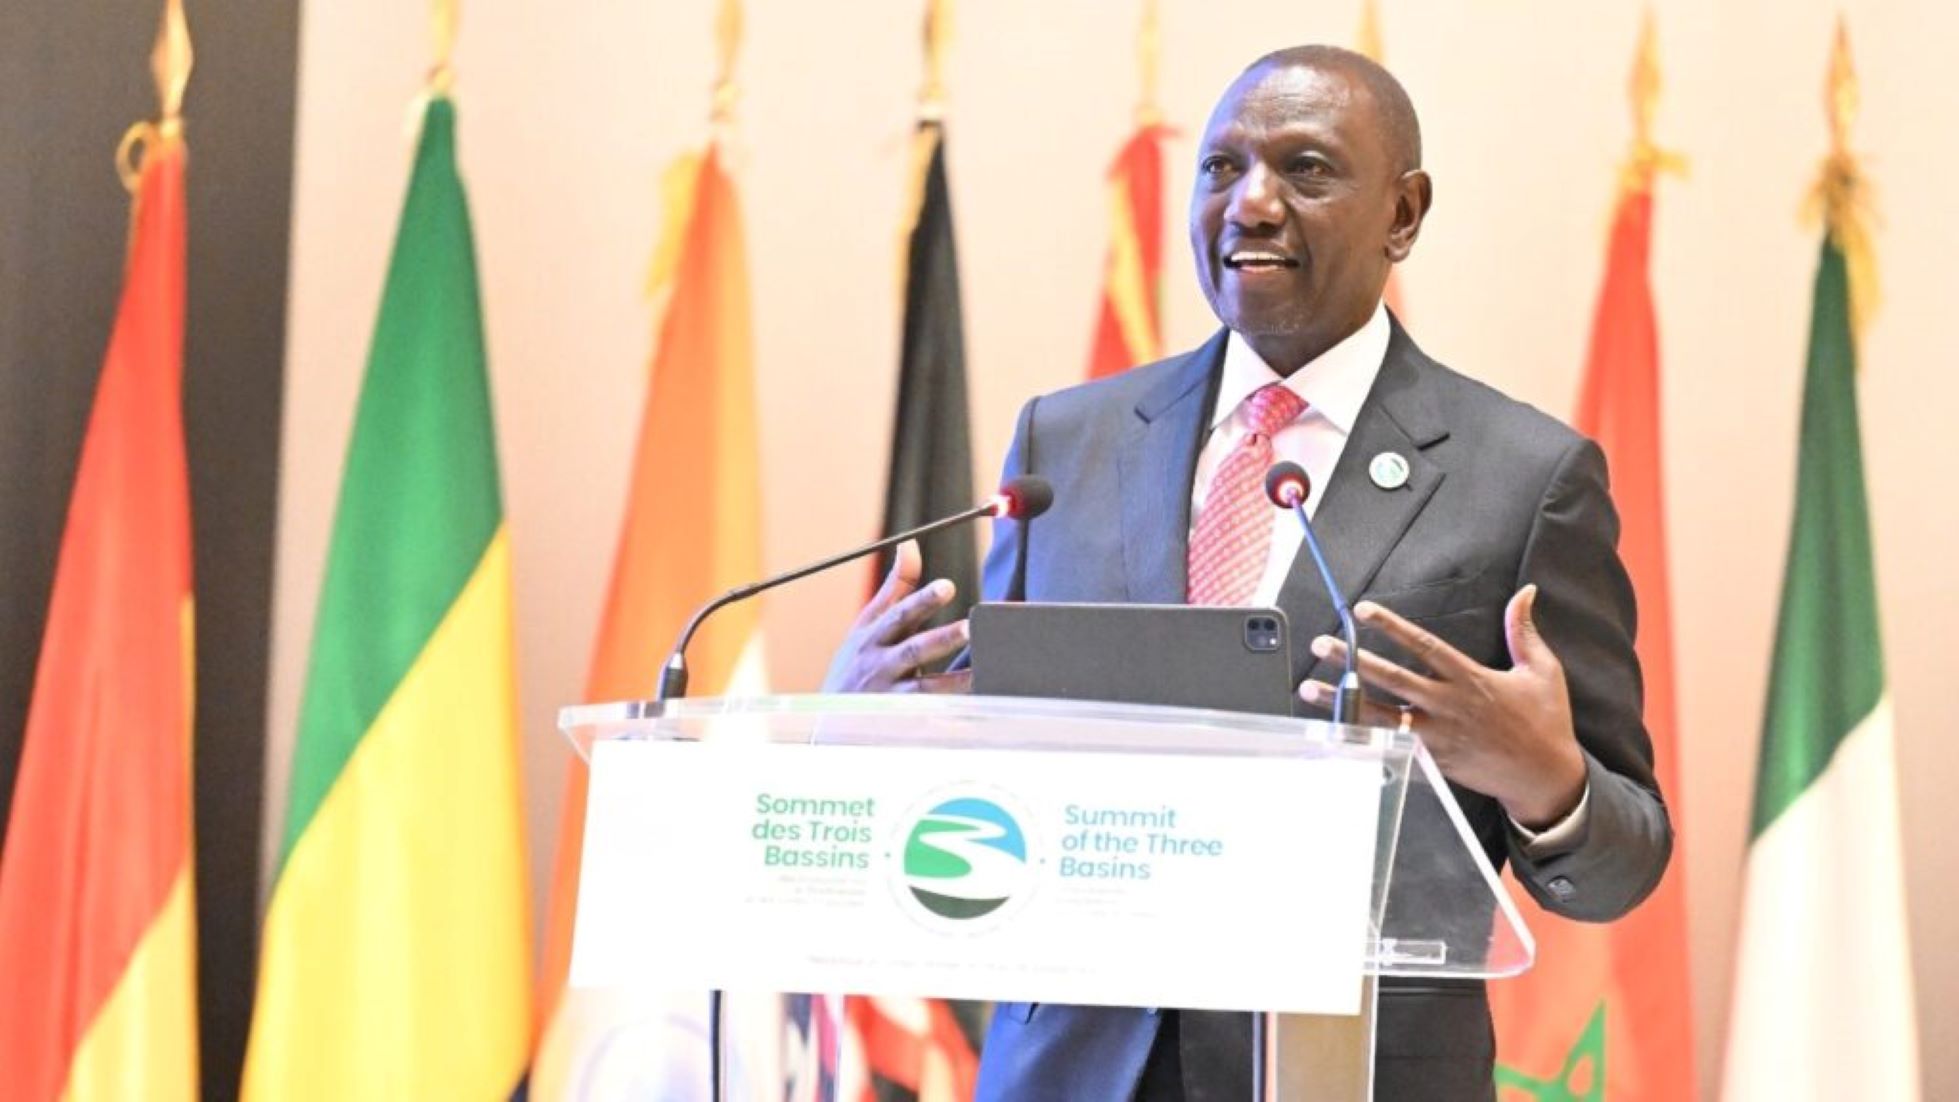 Kenya To Lift Visa Requirements For All Africans: President